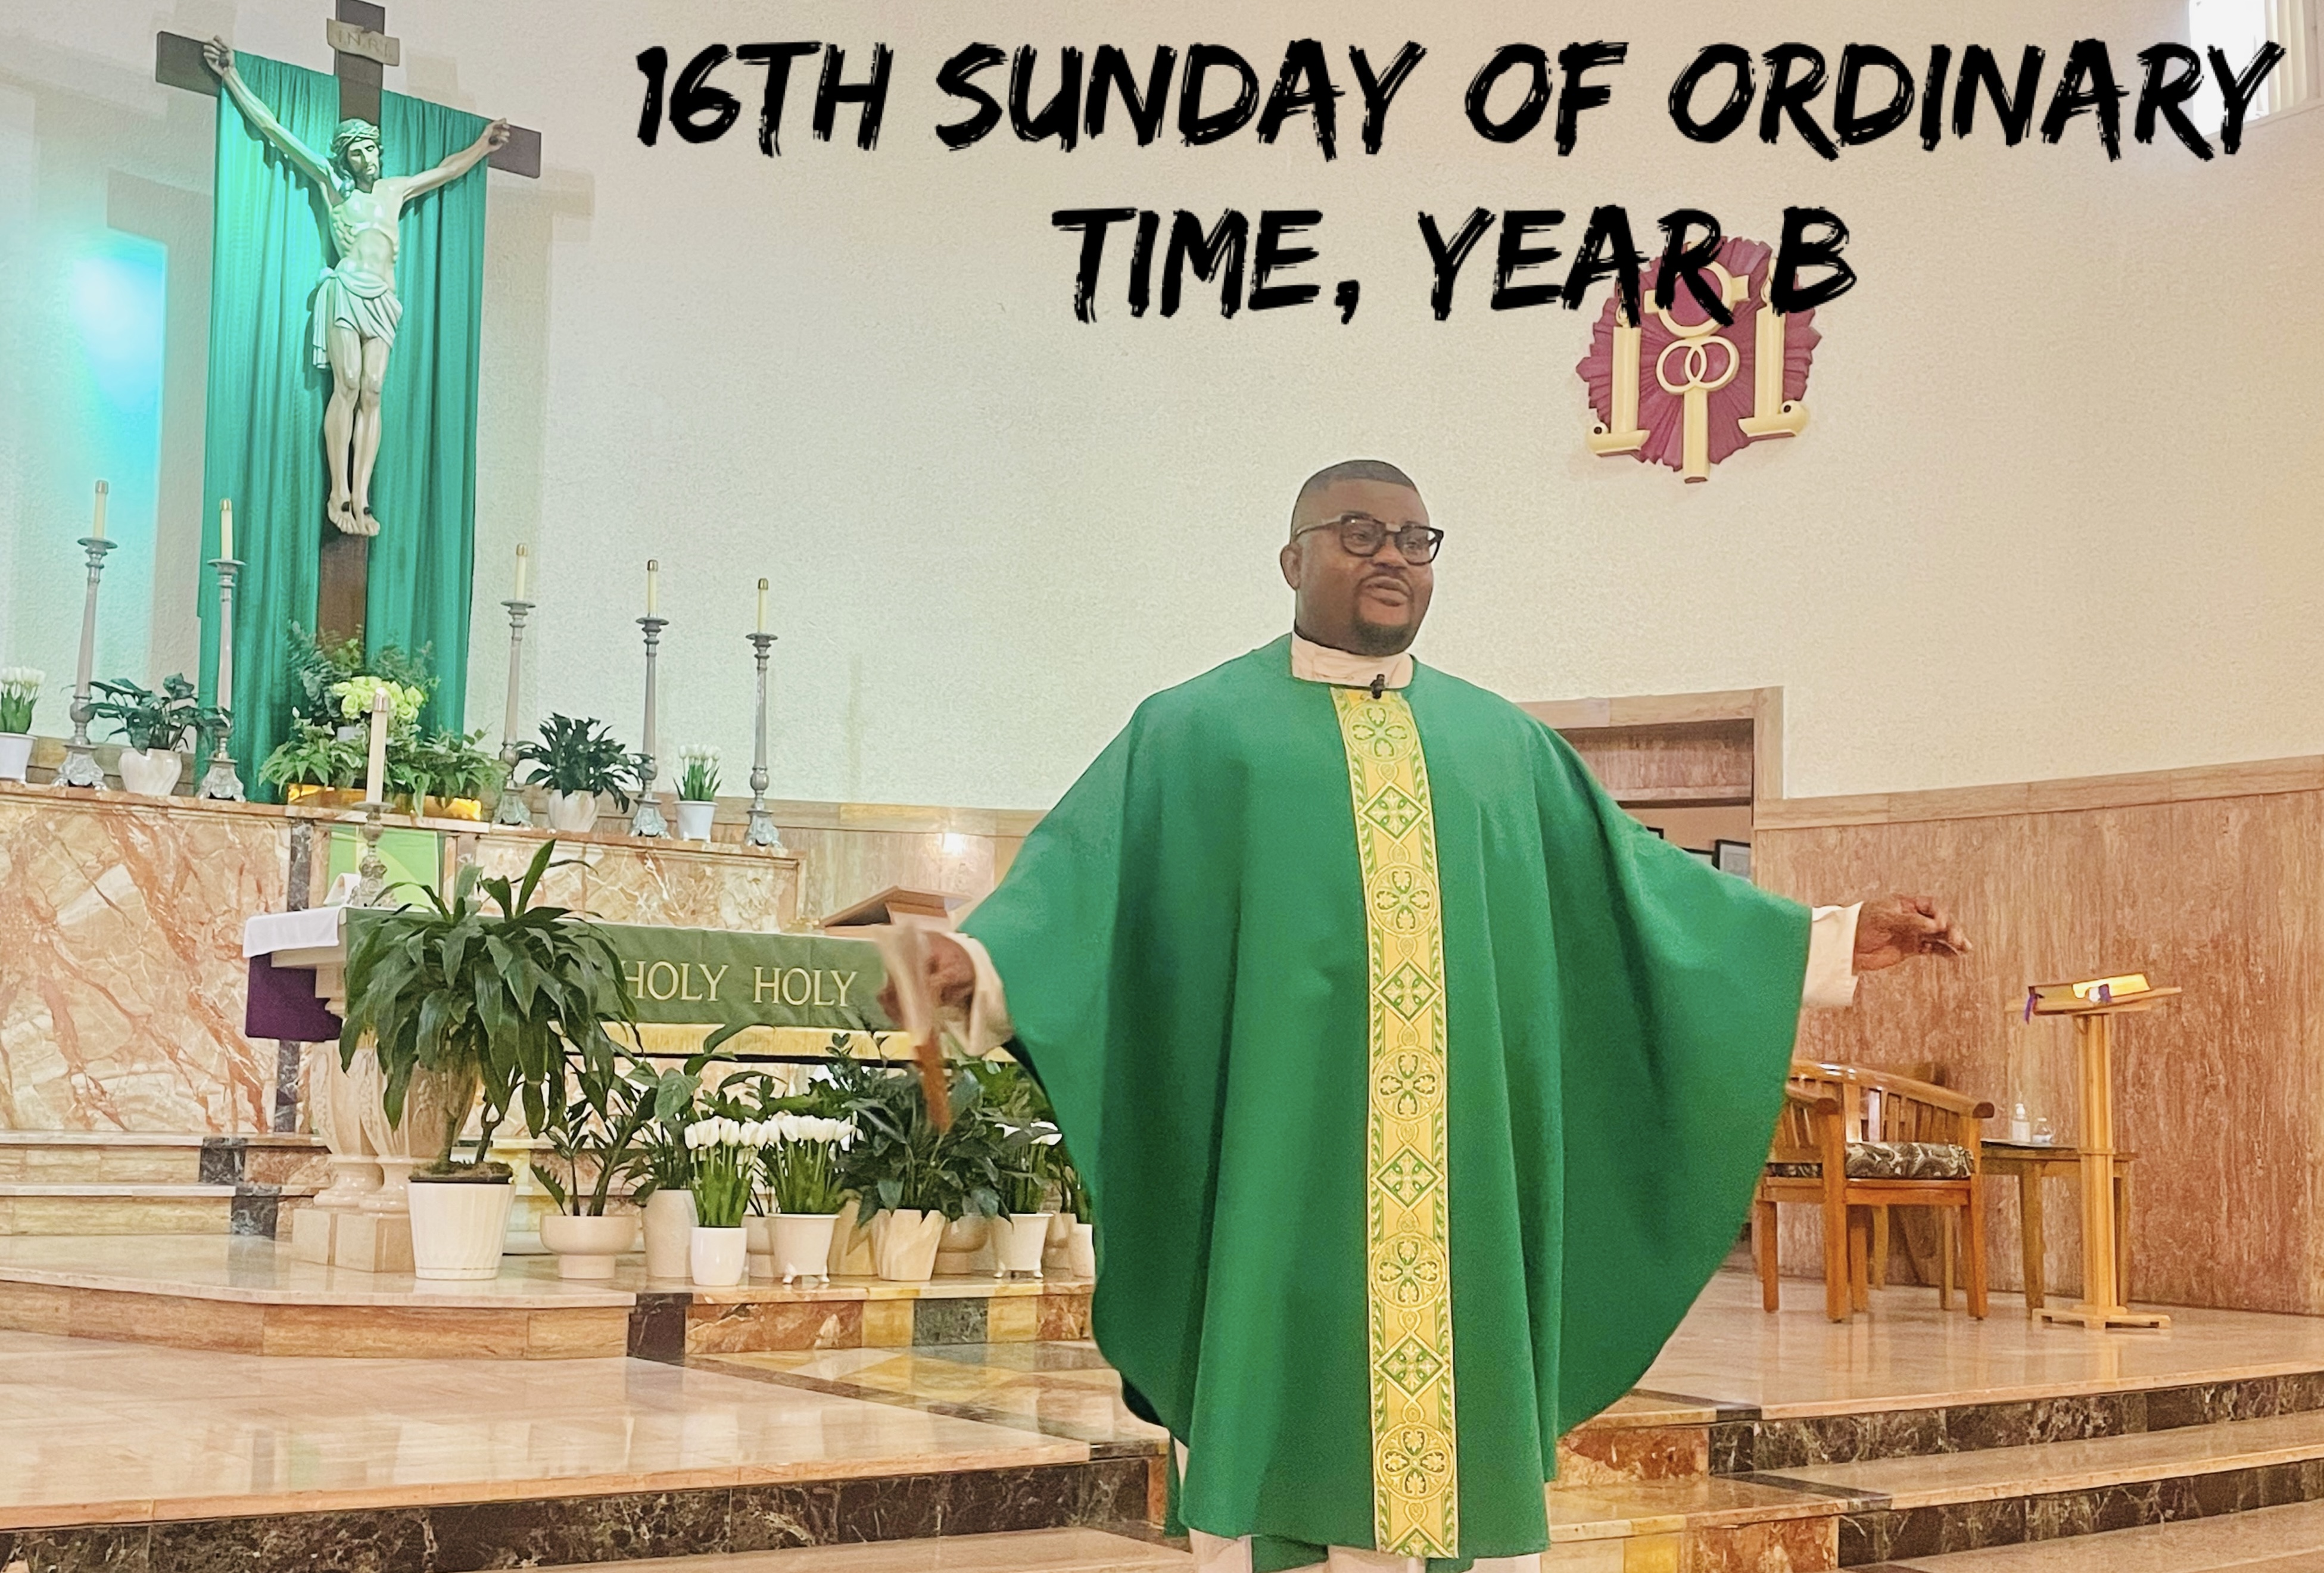 16th Sunday of Ordinary Time, Year B